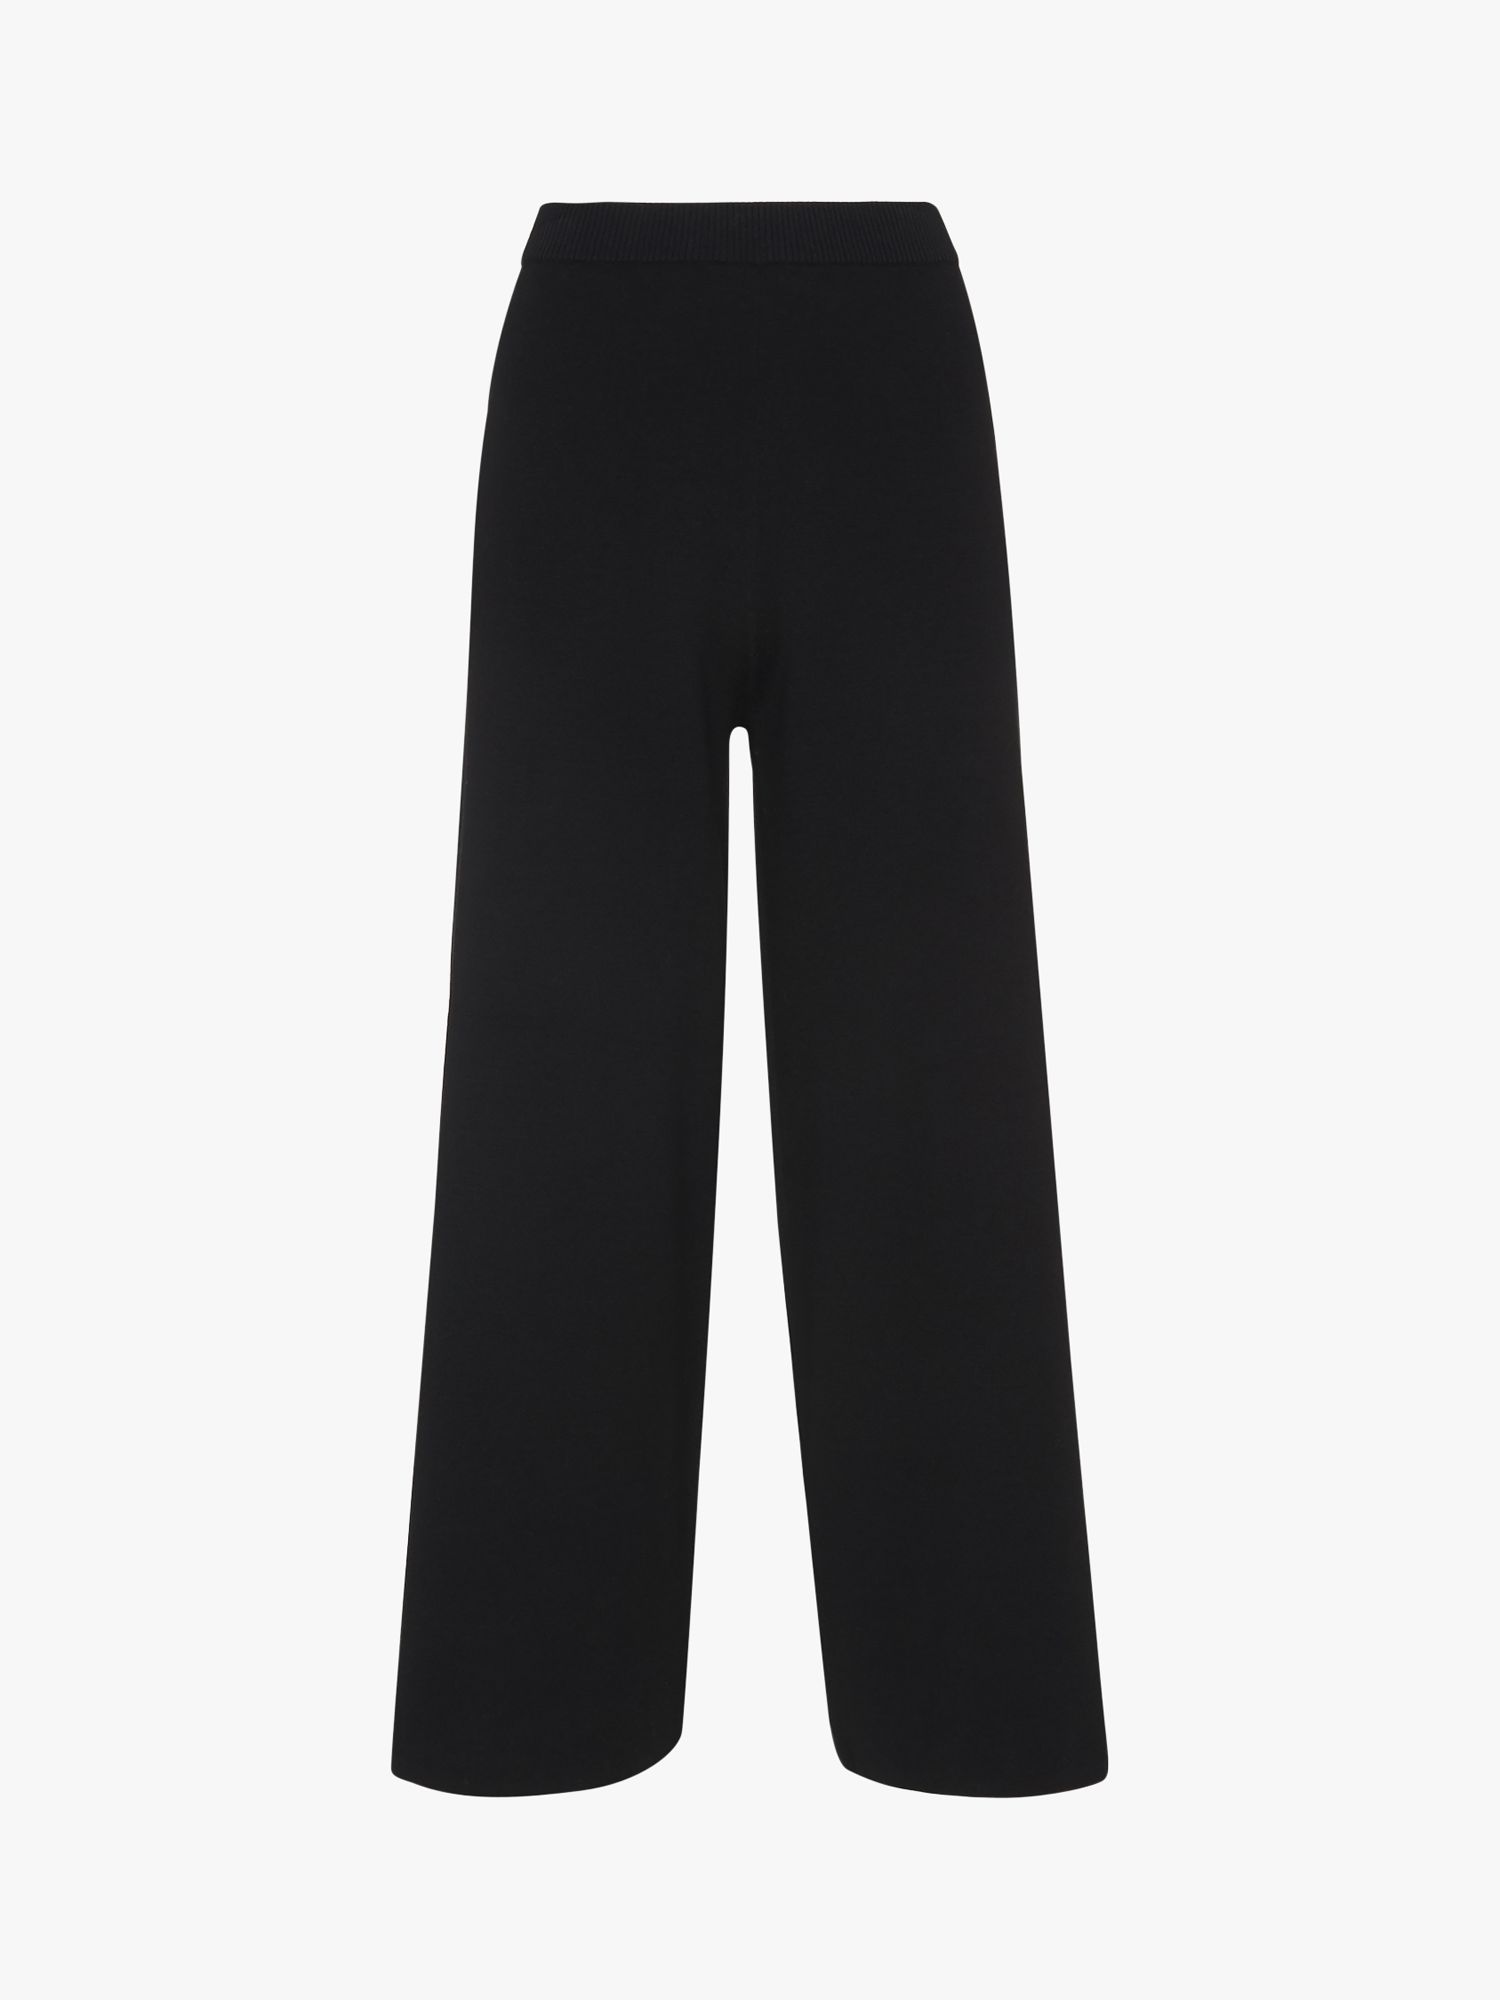 Whistles Knitted Wide Leg Trousers, Black at John Lewis & Partners